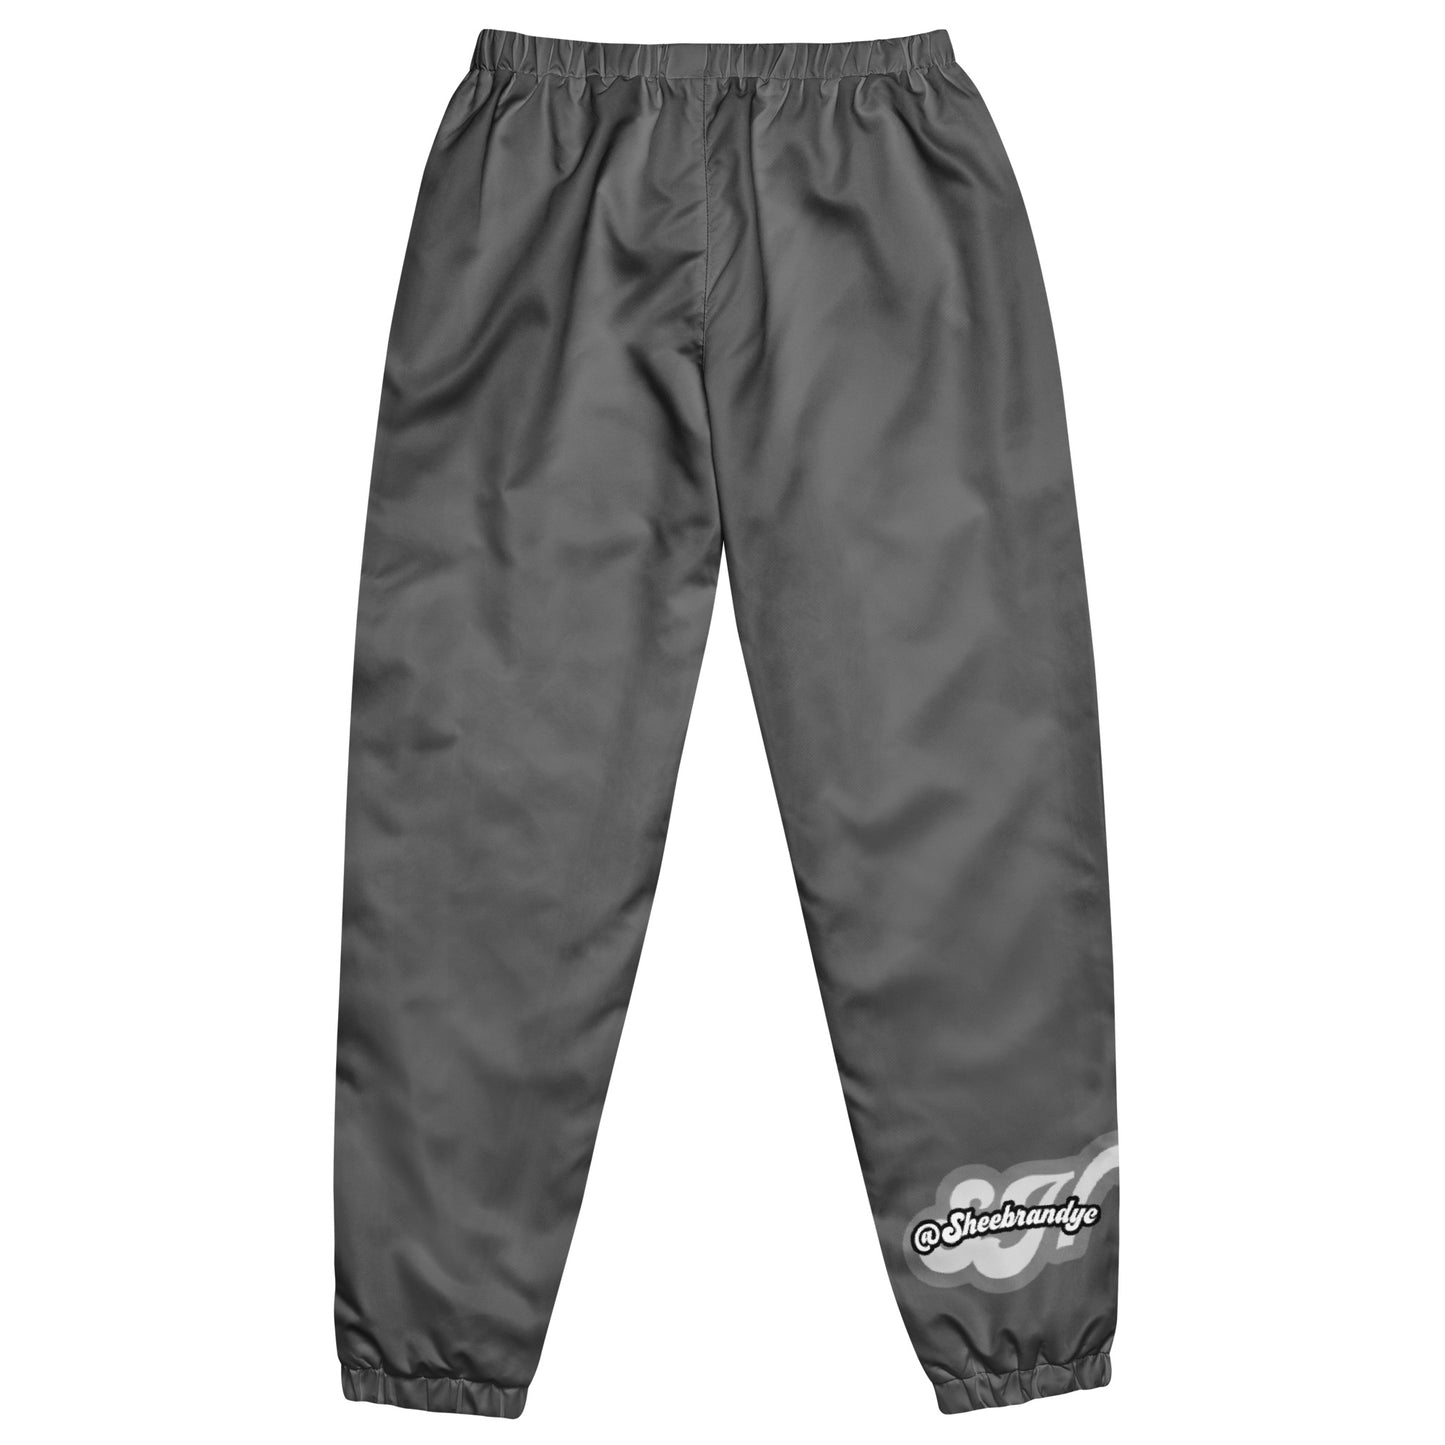 Silver Unisex track pants